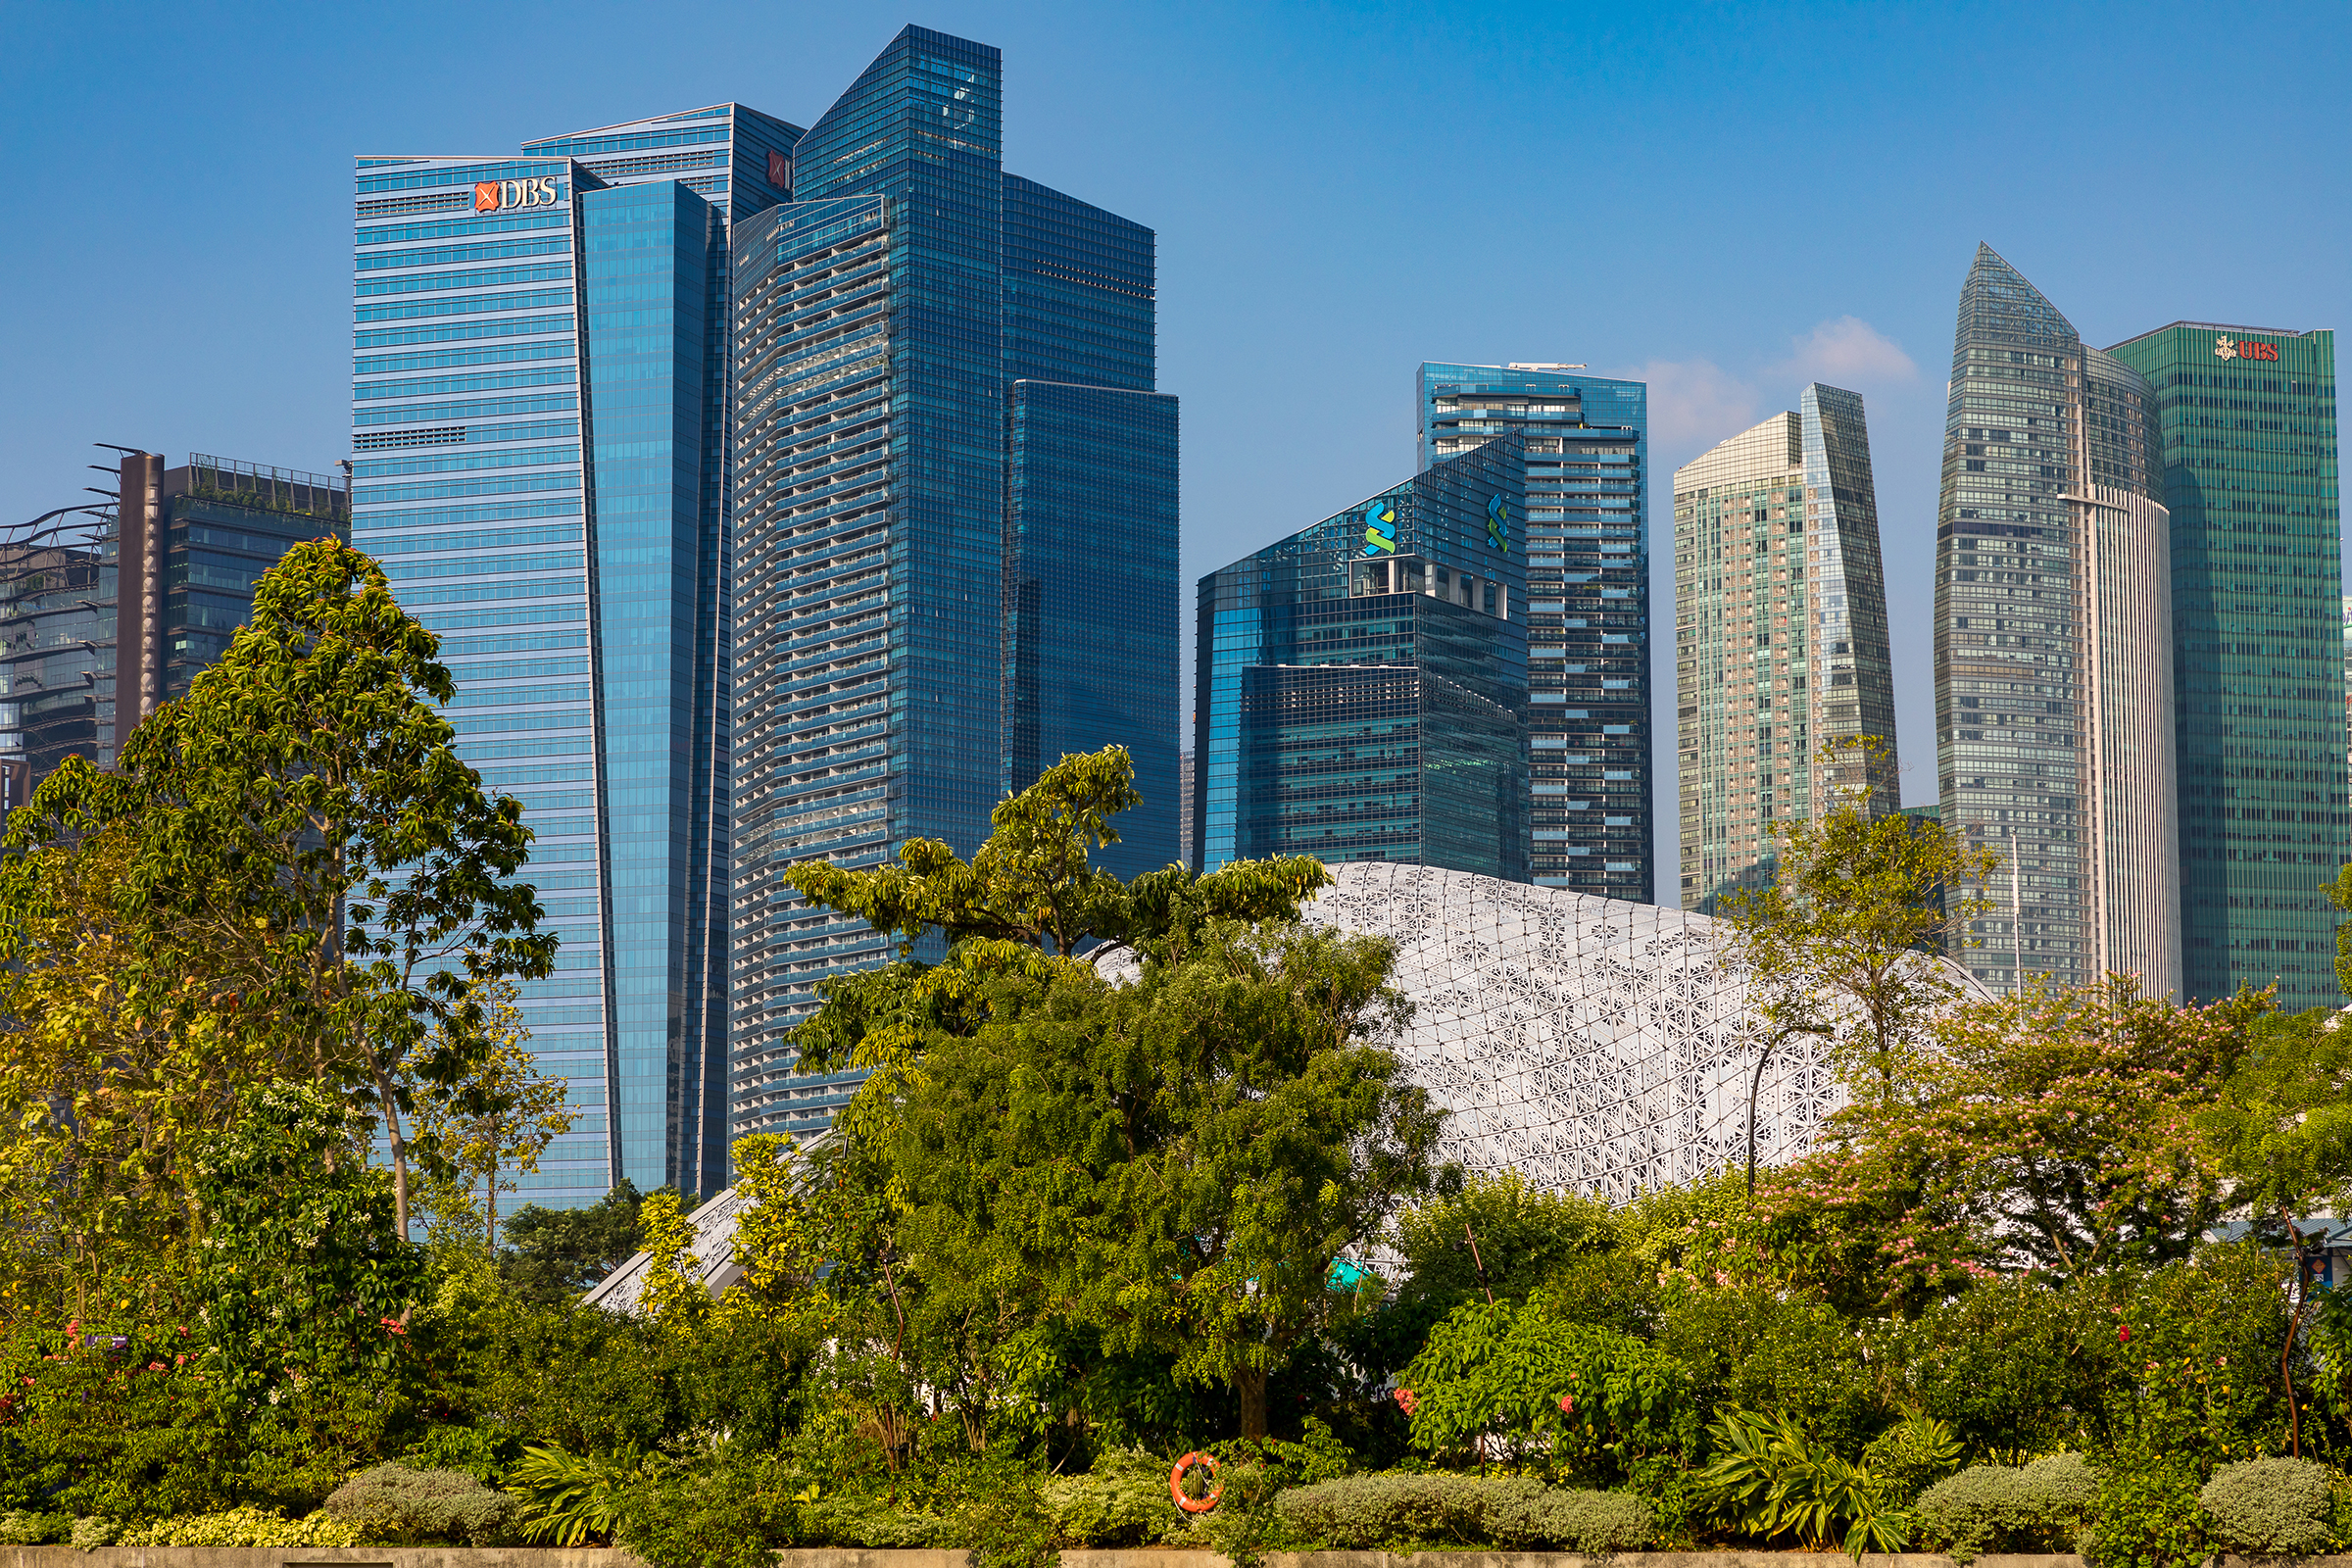 <p>The Future of Us Pavilion as a permanent Singapore landmark, view from northeast.</p>